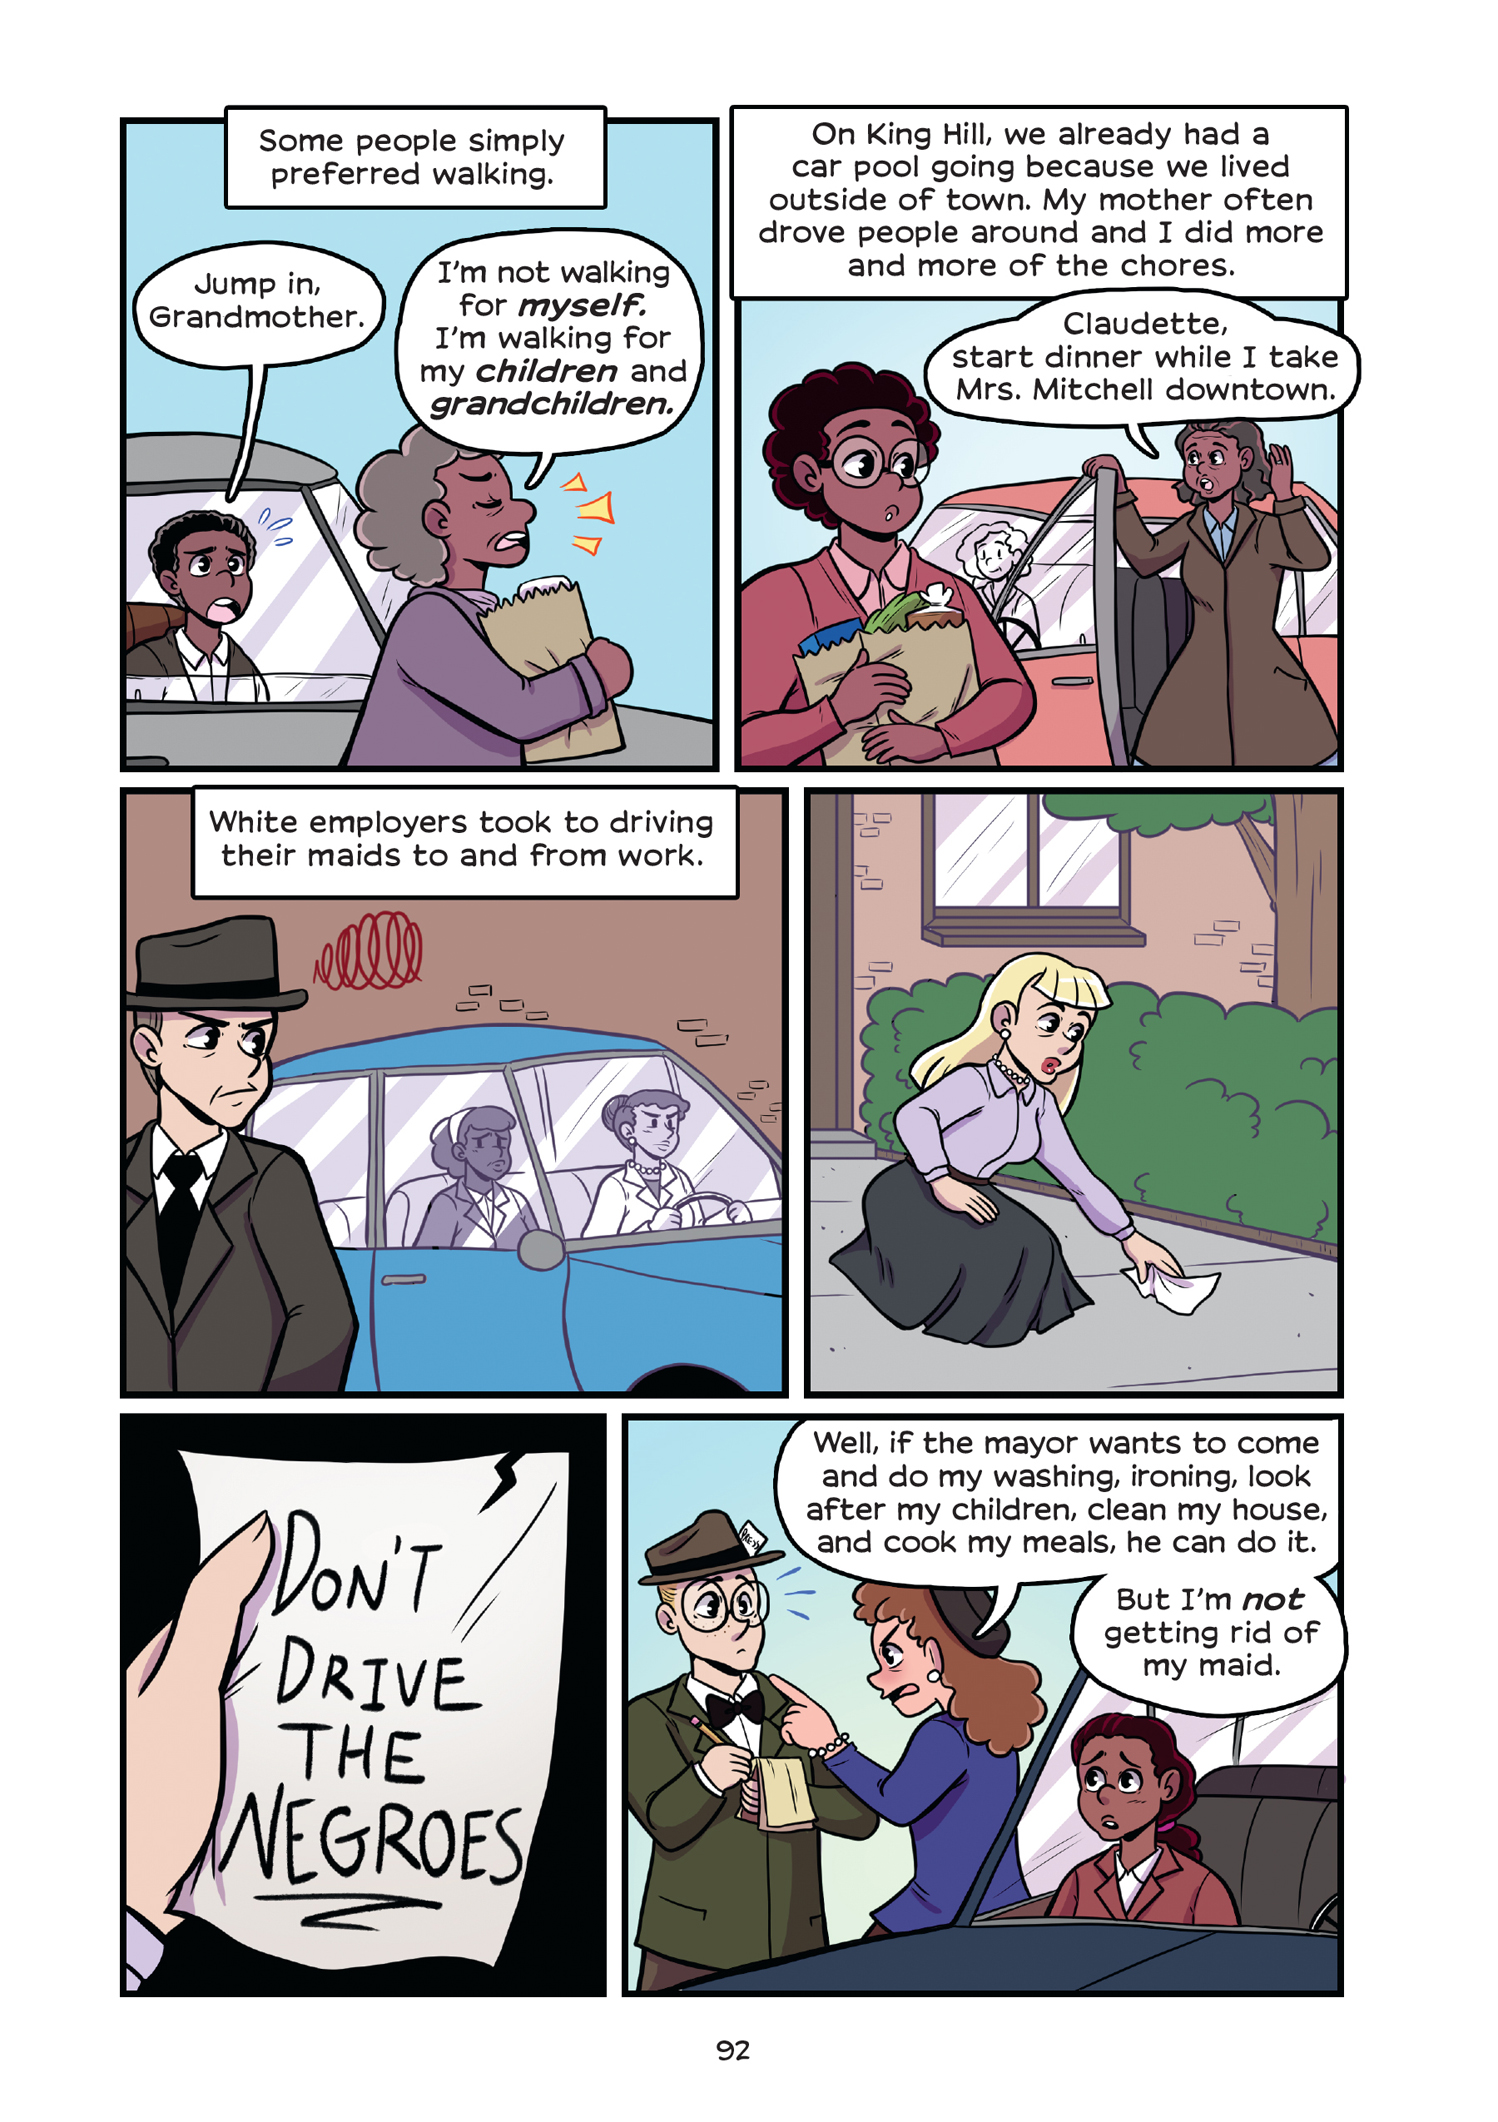 Read online History Comics comic -  Issue # Rosa Parks & Claudette Colvin - Civil Rights Heroes - 97